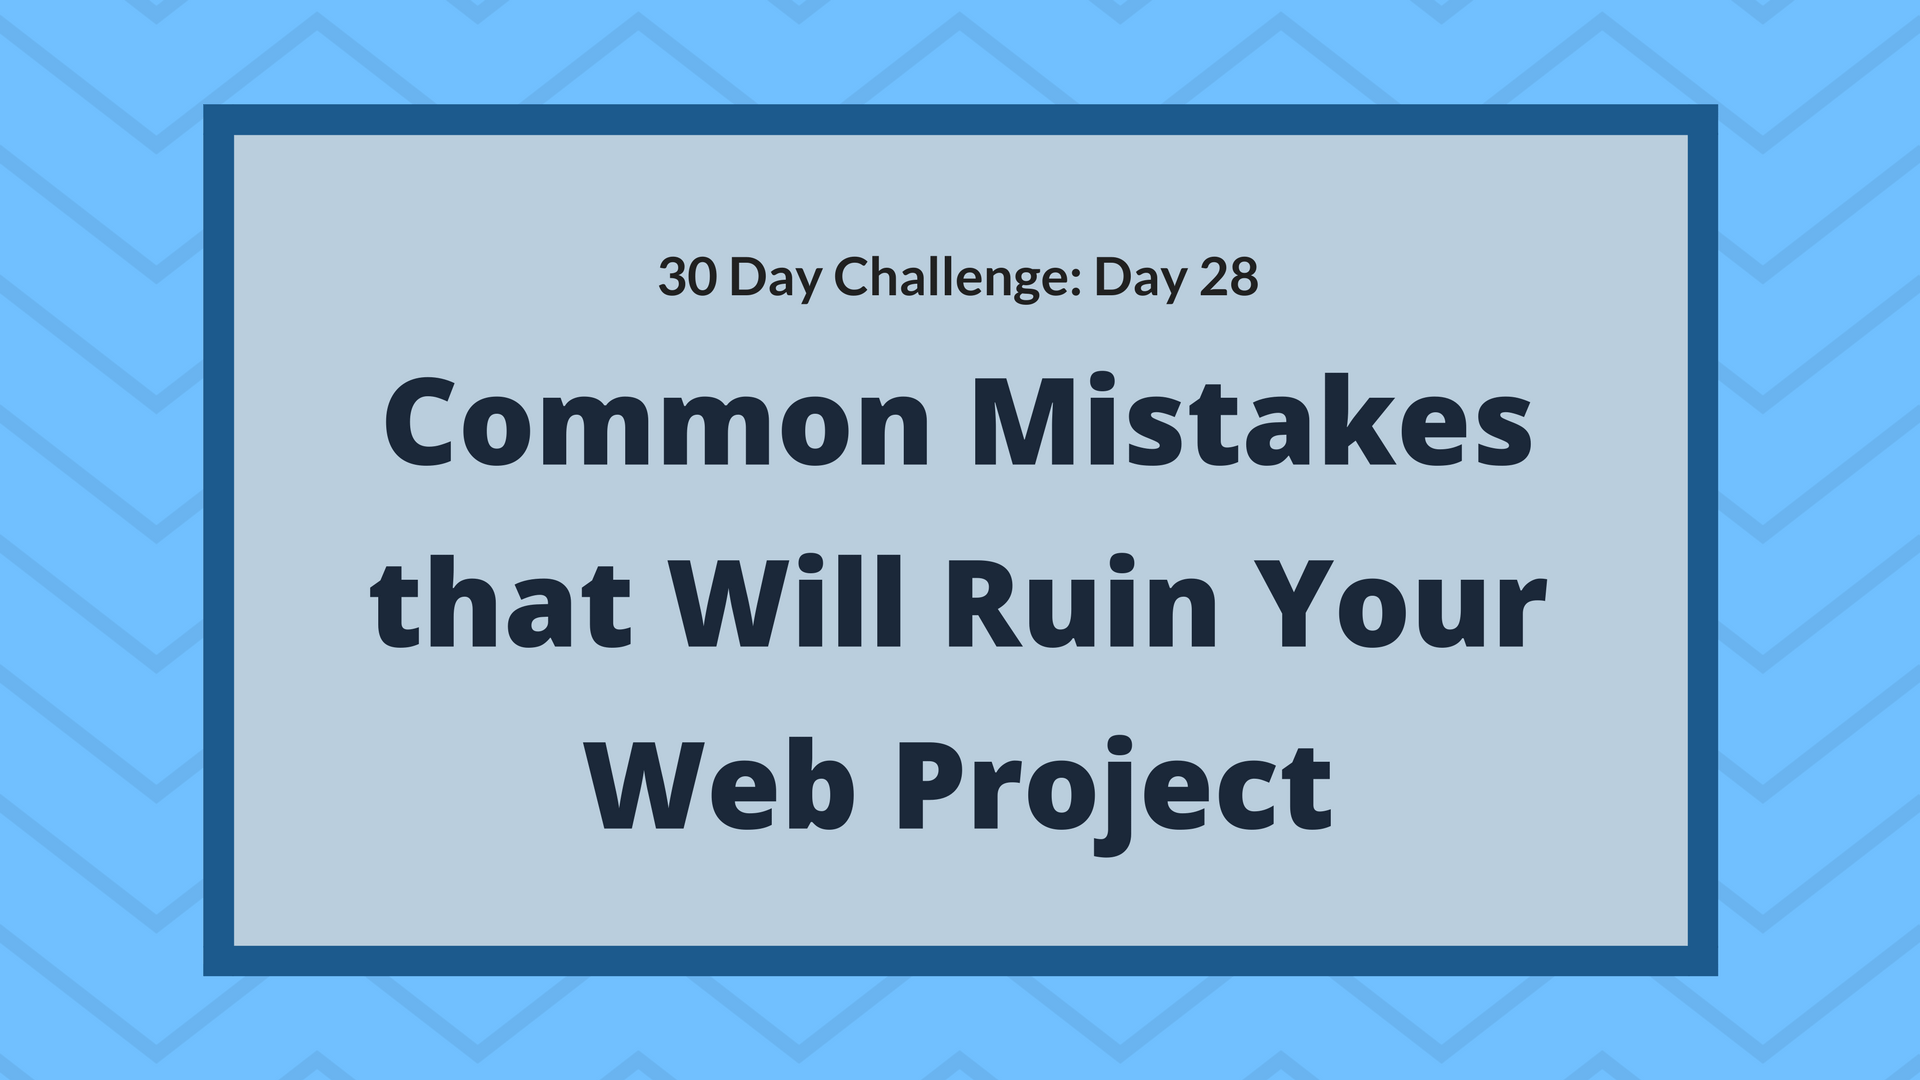 Common mistakes that will ruin your web project